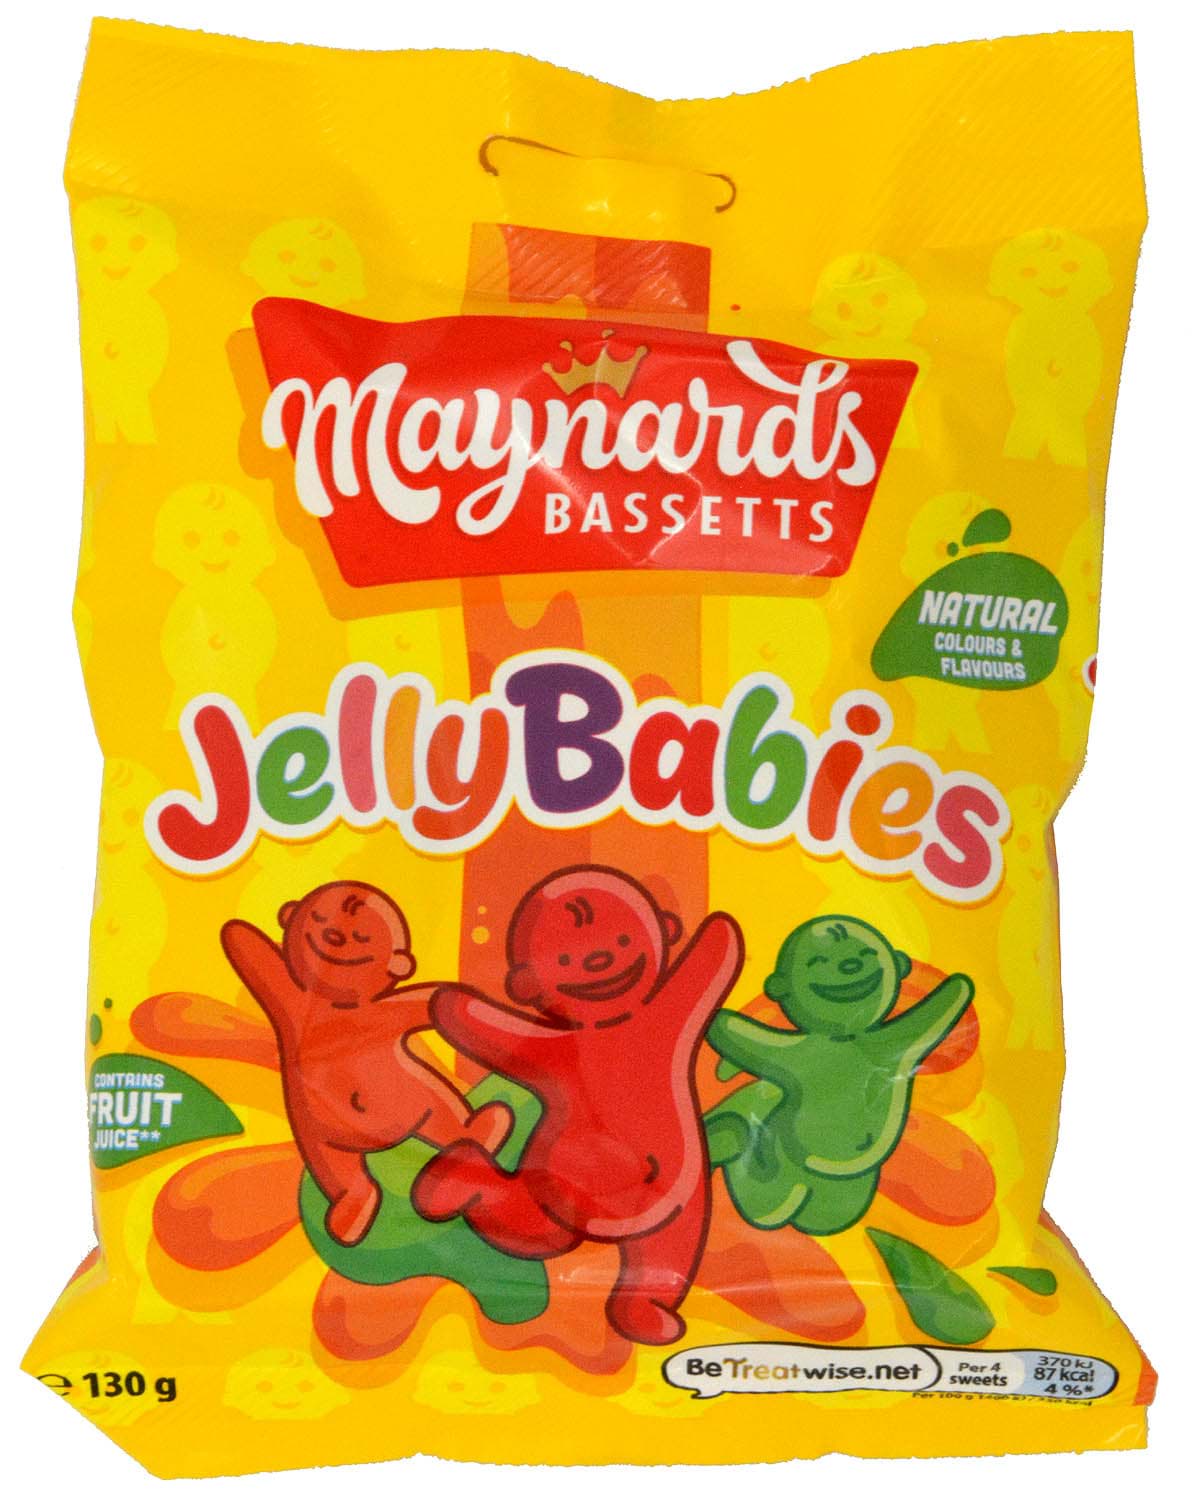 Picture of Maynards Bassetts Jelly Babies 130g